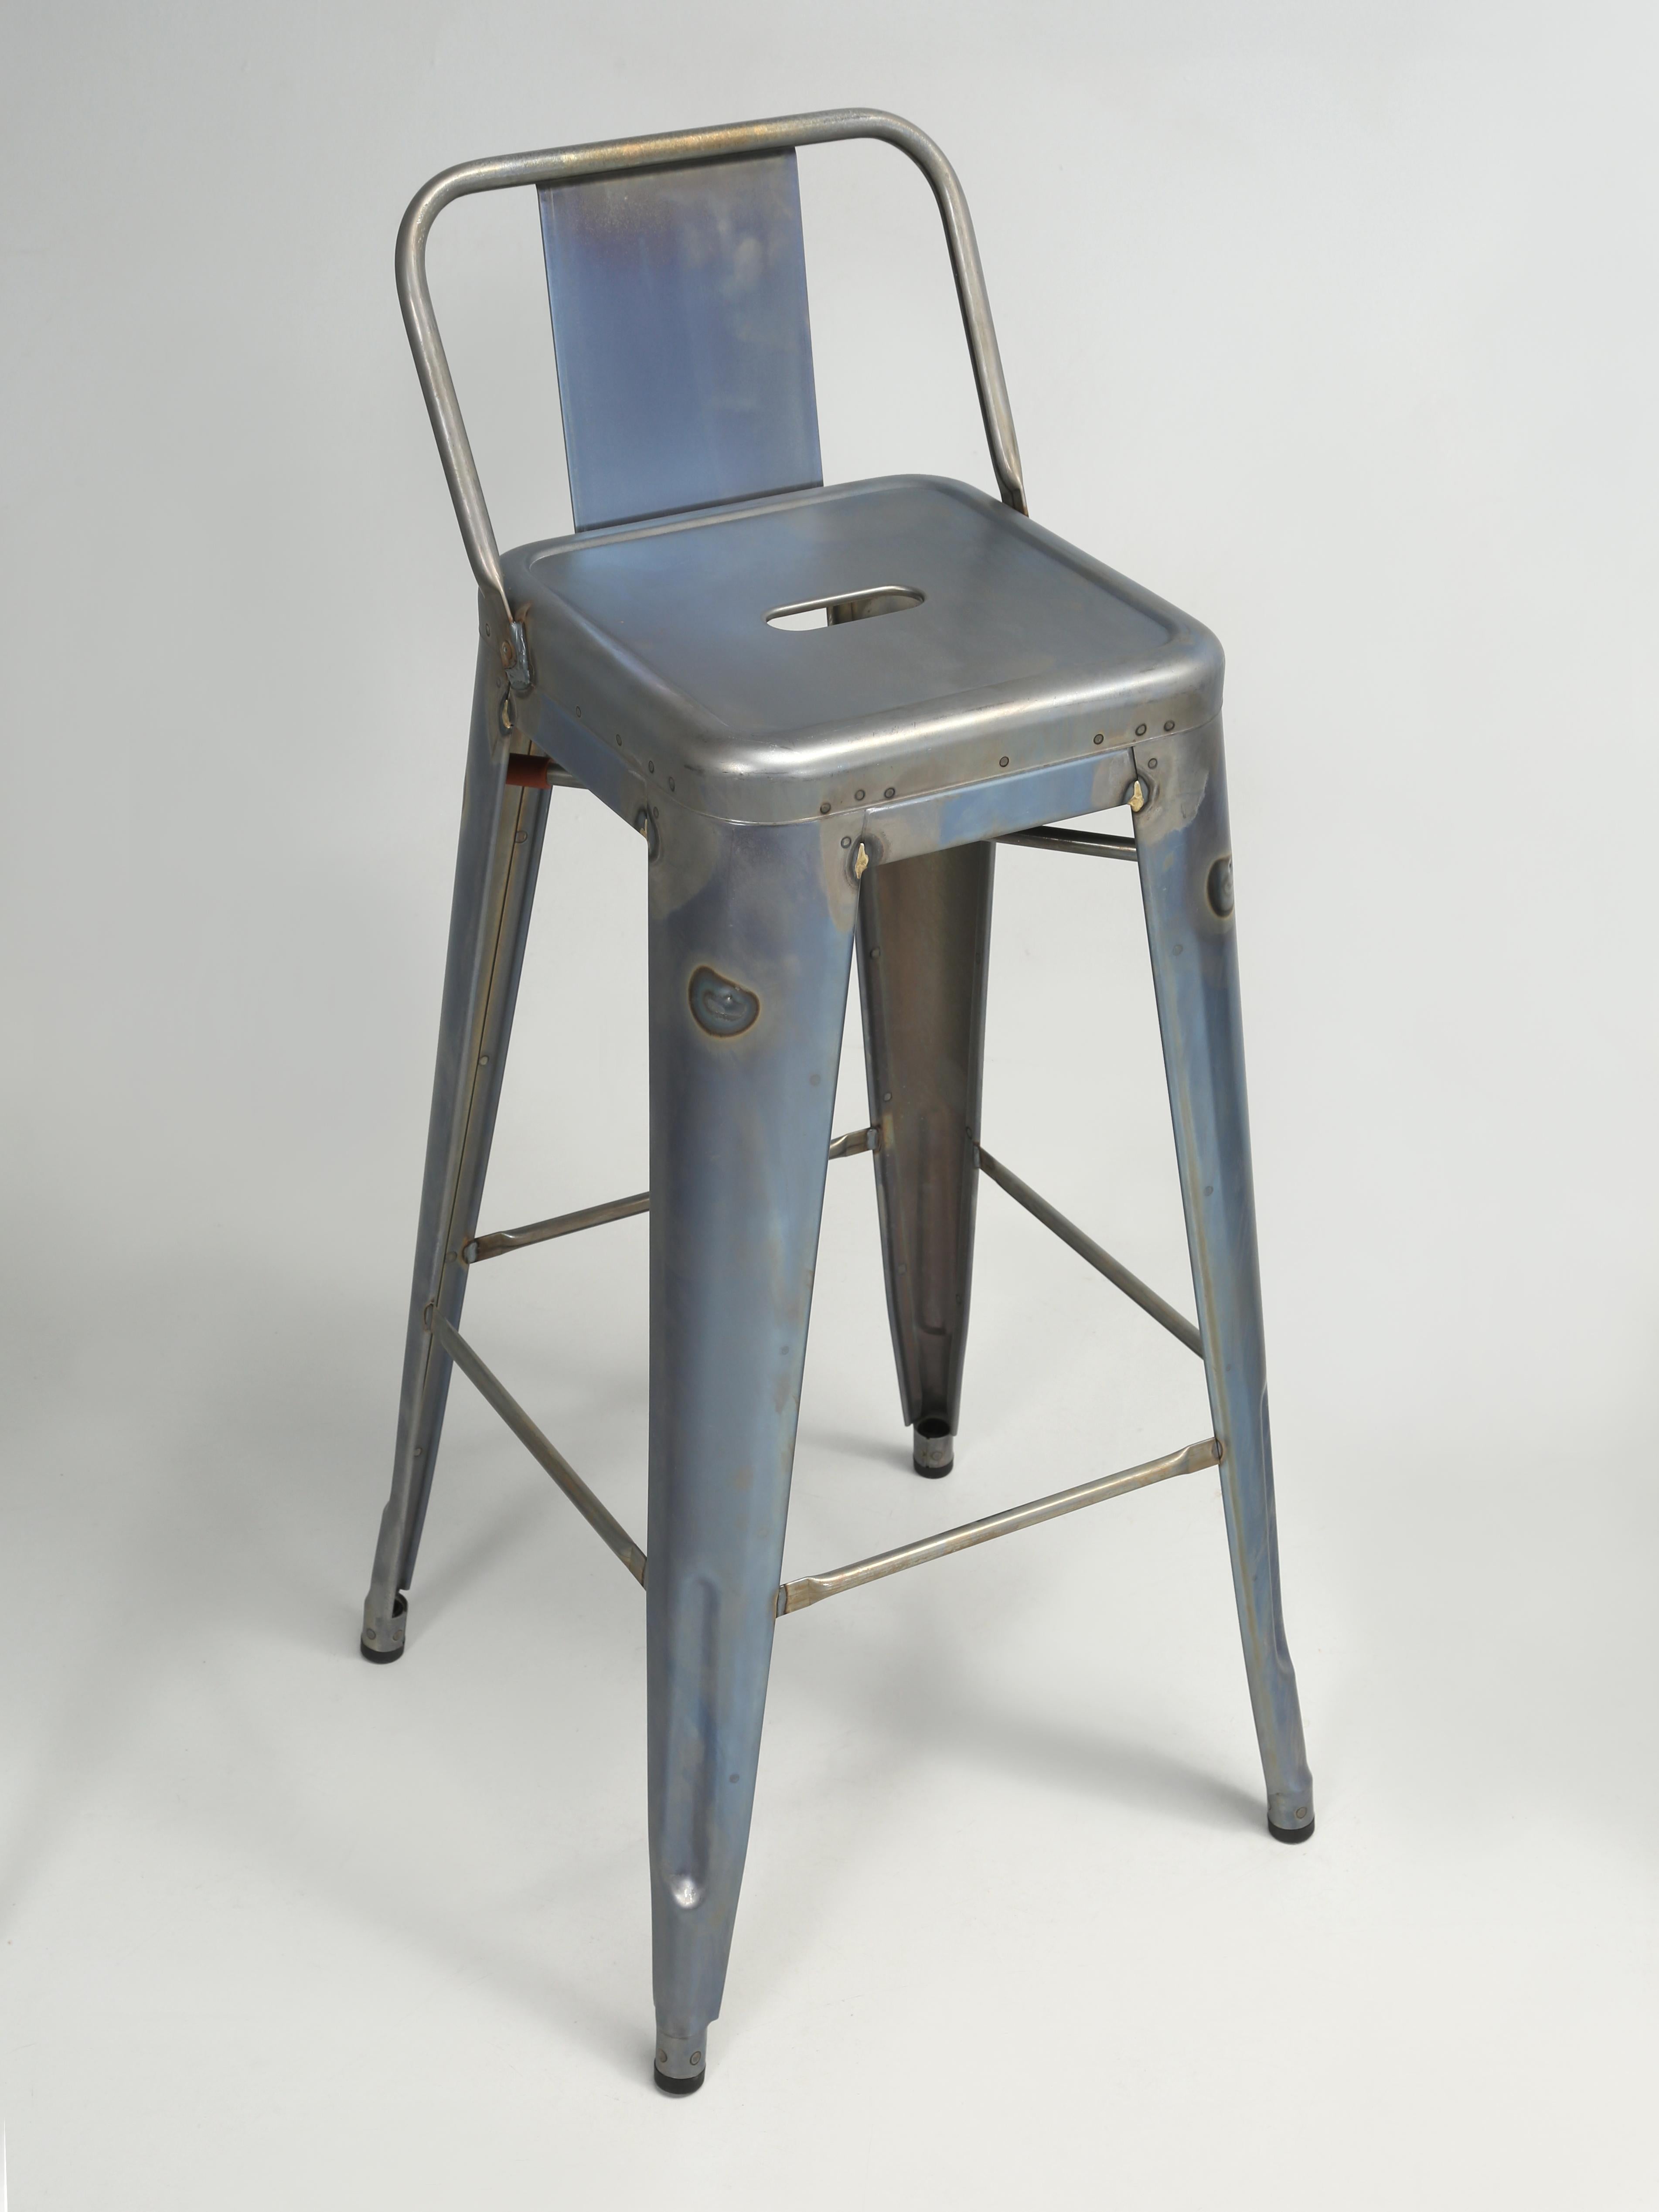 Genuine French Hand-Made Tolix Steel Bar Stools, not to be confused with kitchen island stools which are lower. Our set of (4) Bar Height Tolix Steel Stools are finished in a blue wash that prevents rust from forming and are ready to paint. We